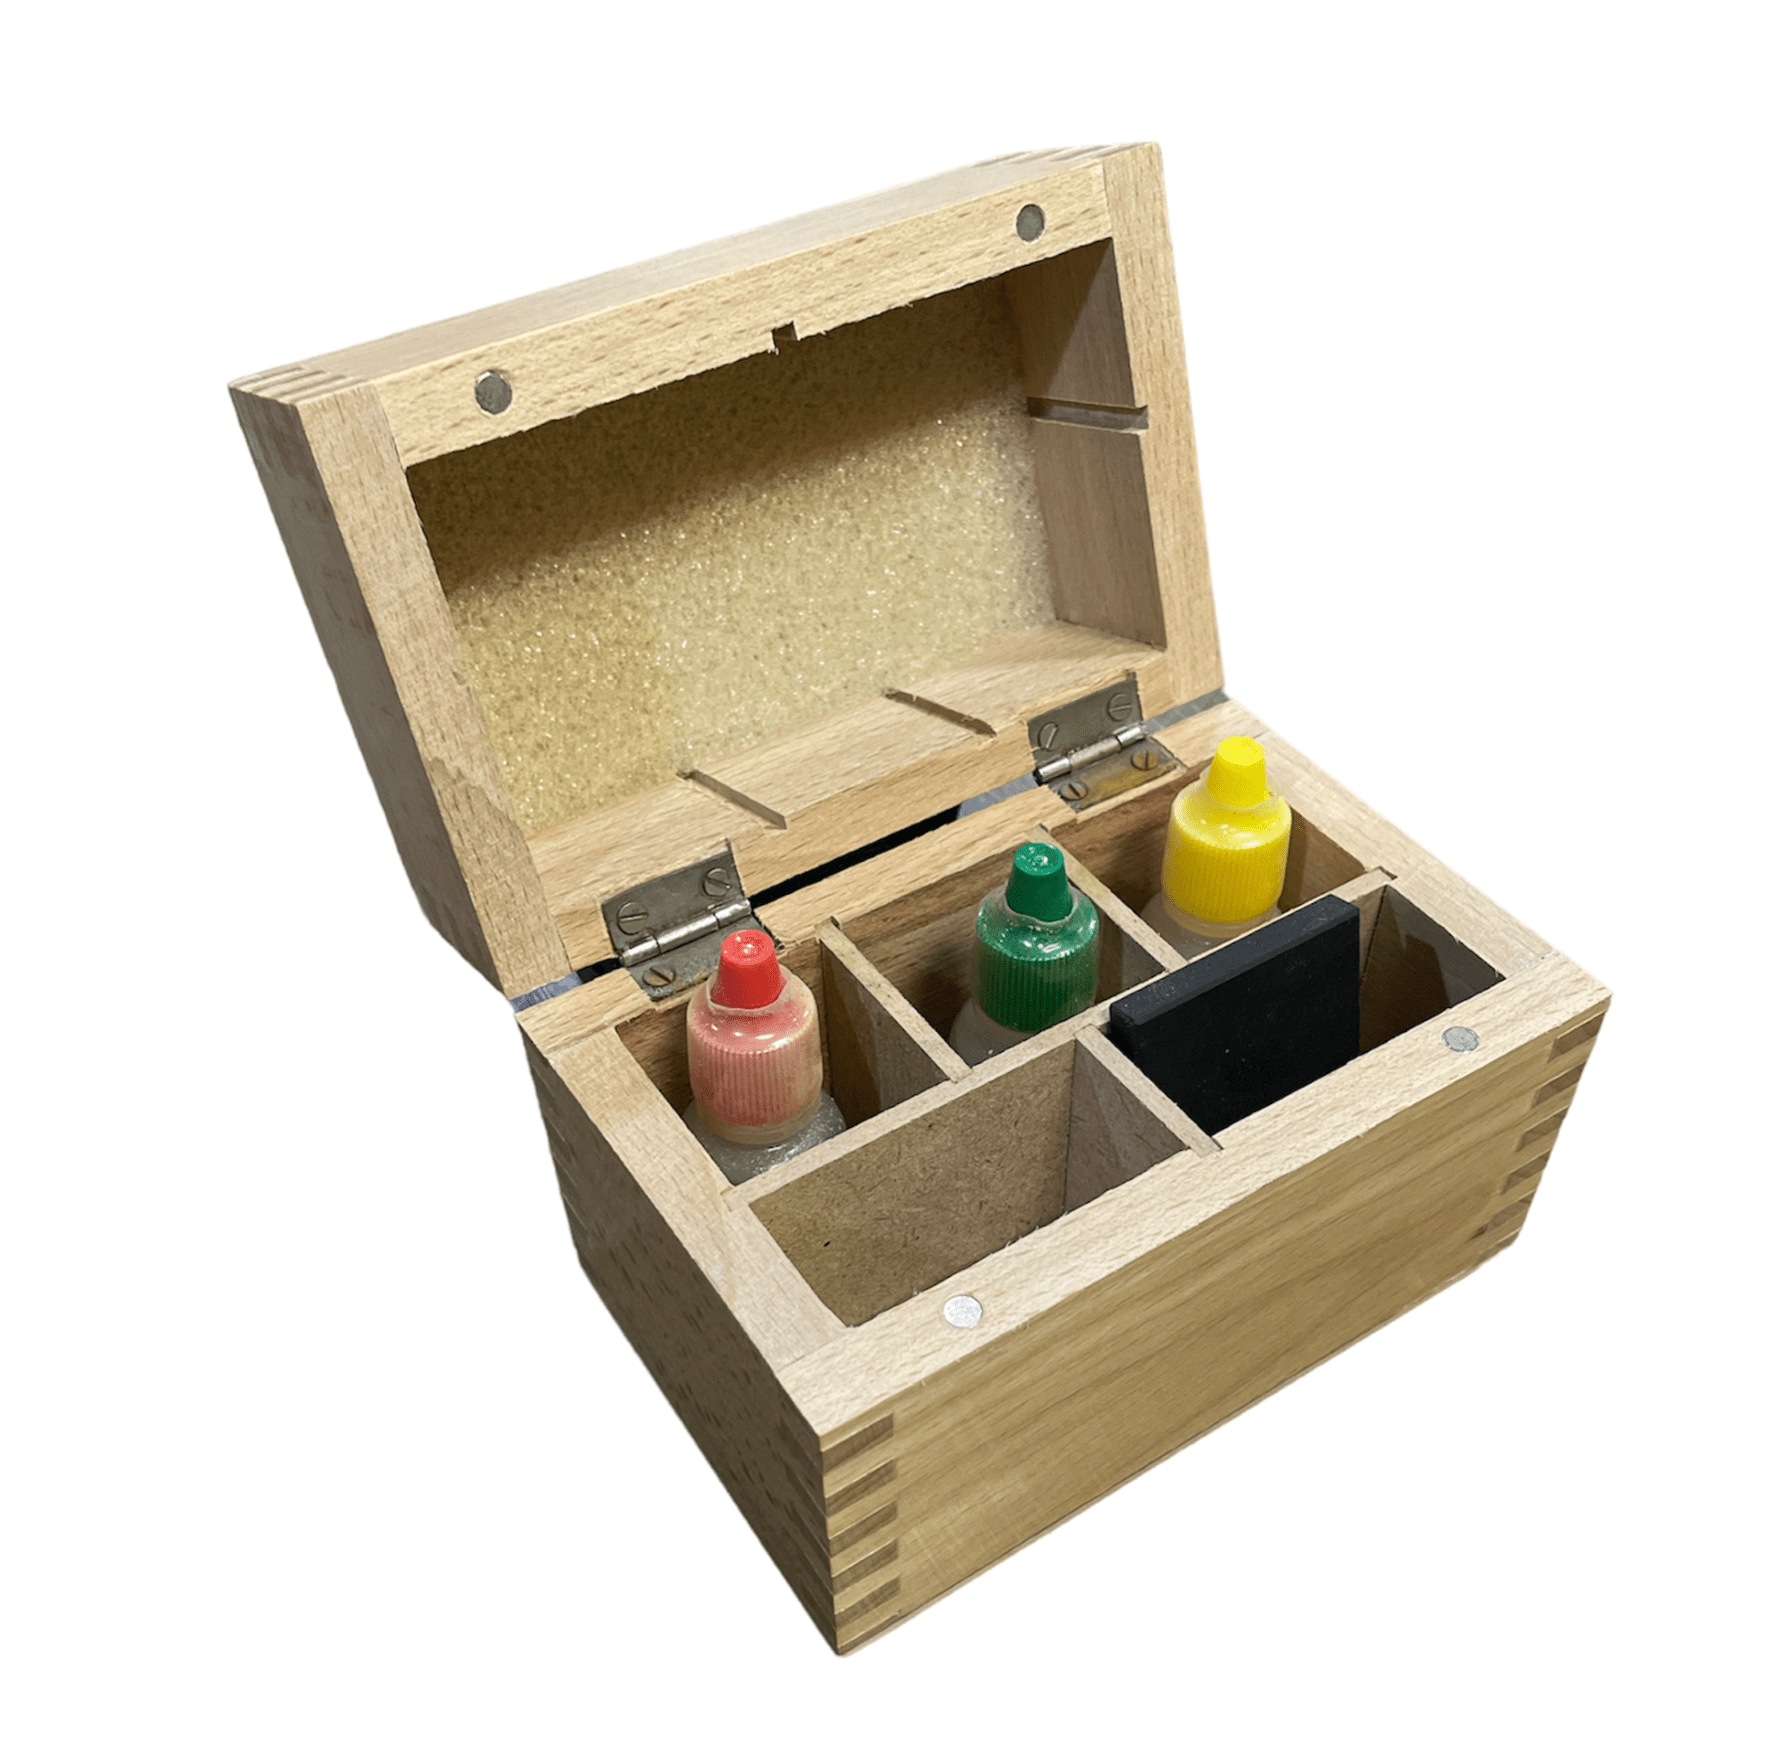 Gold testing acid solution kit with testing stone and wooden storage box side view.